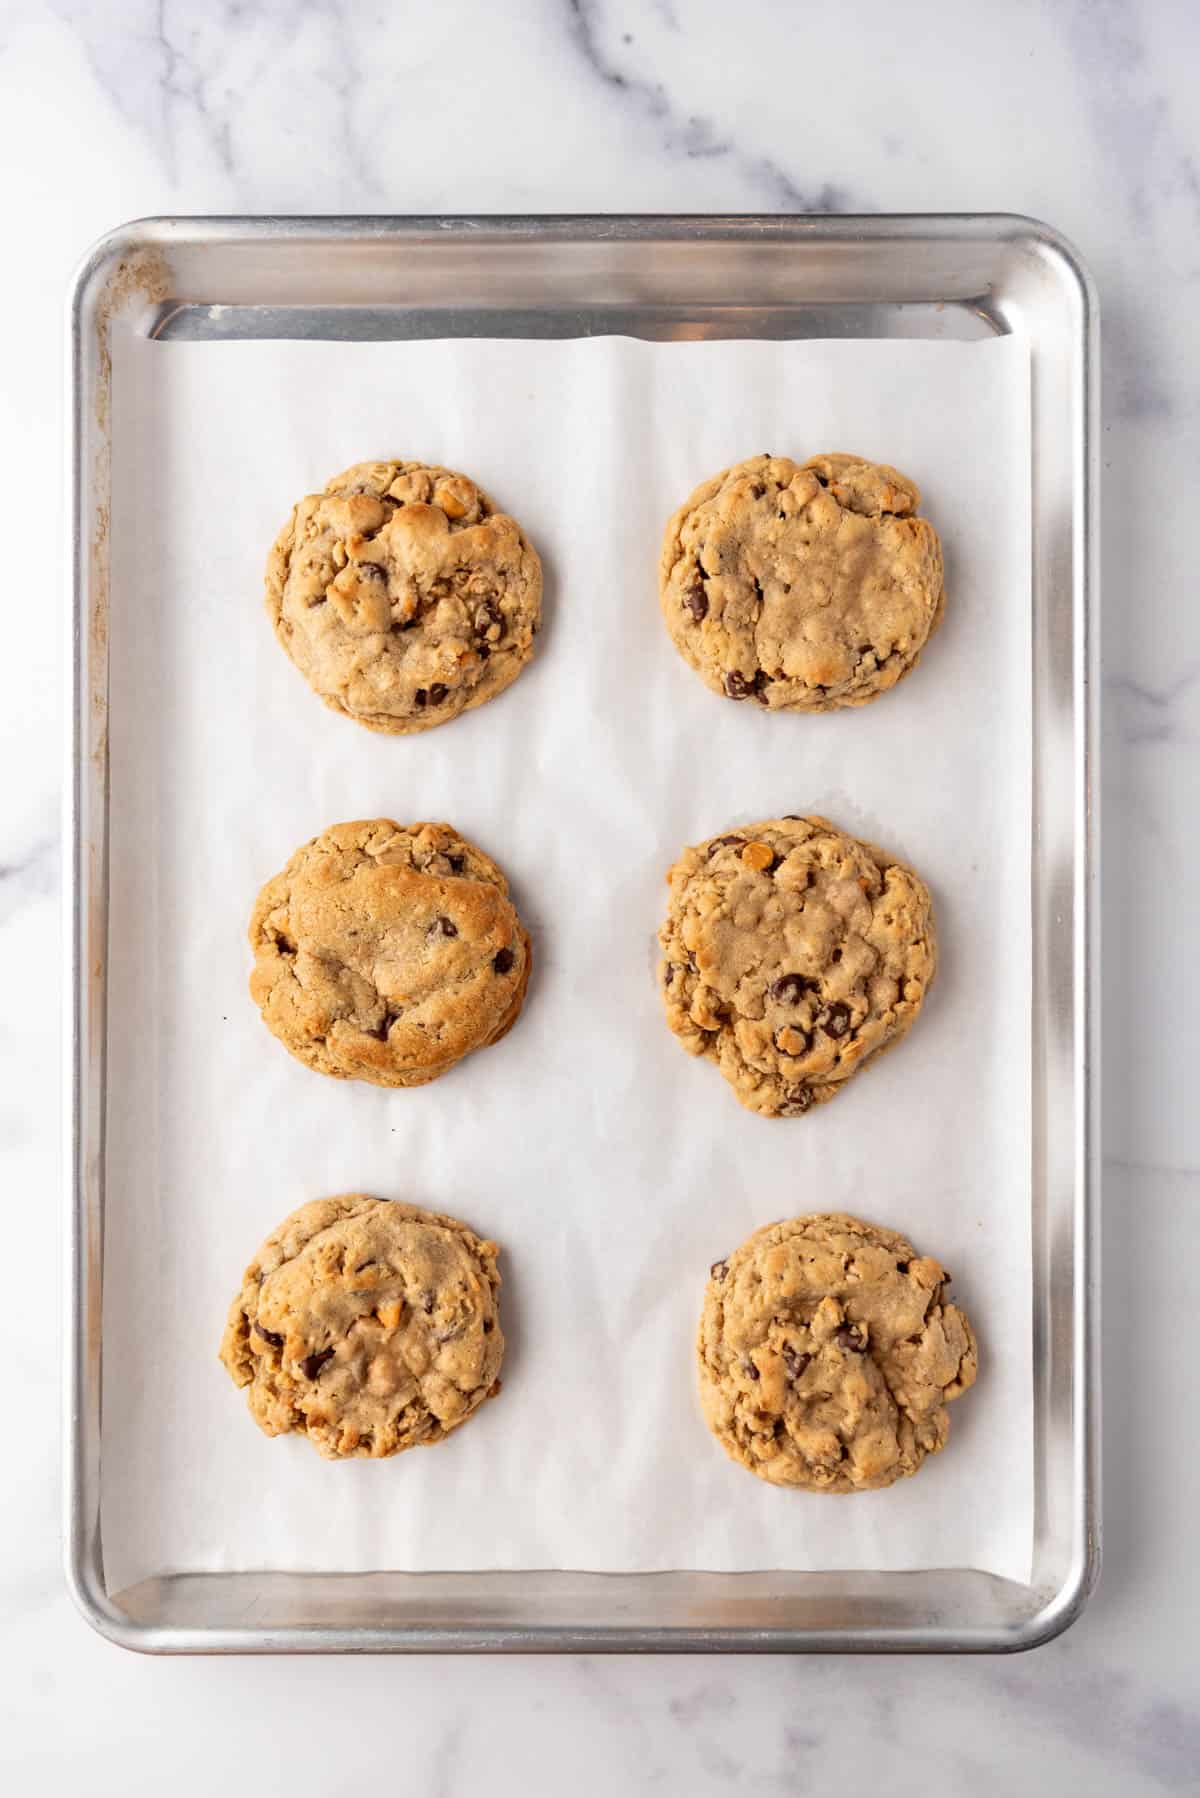 An image of baked  oatmeal butterscotch cookies on a baking sheet lined with parchment paper.